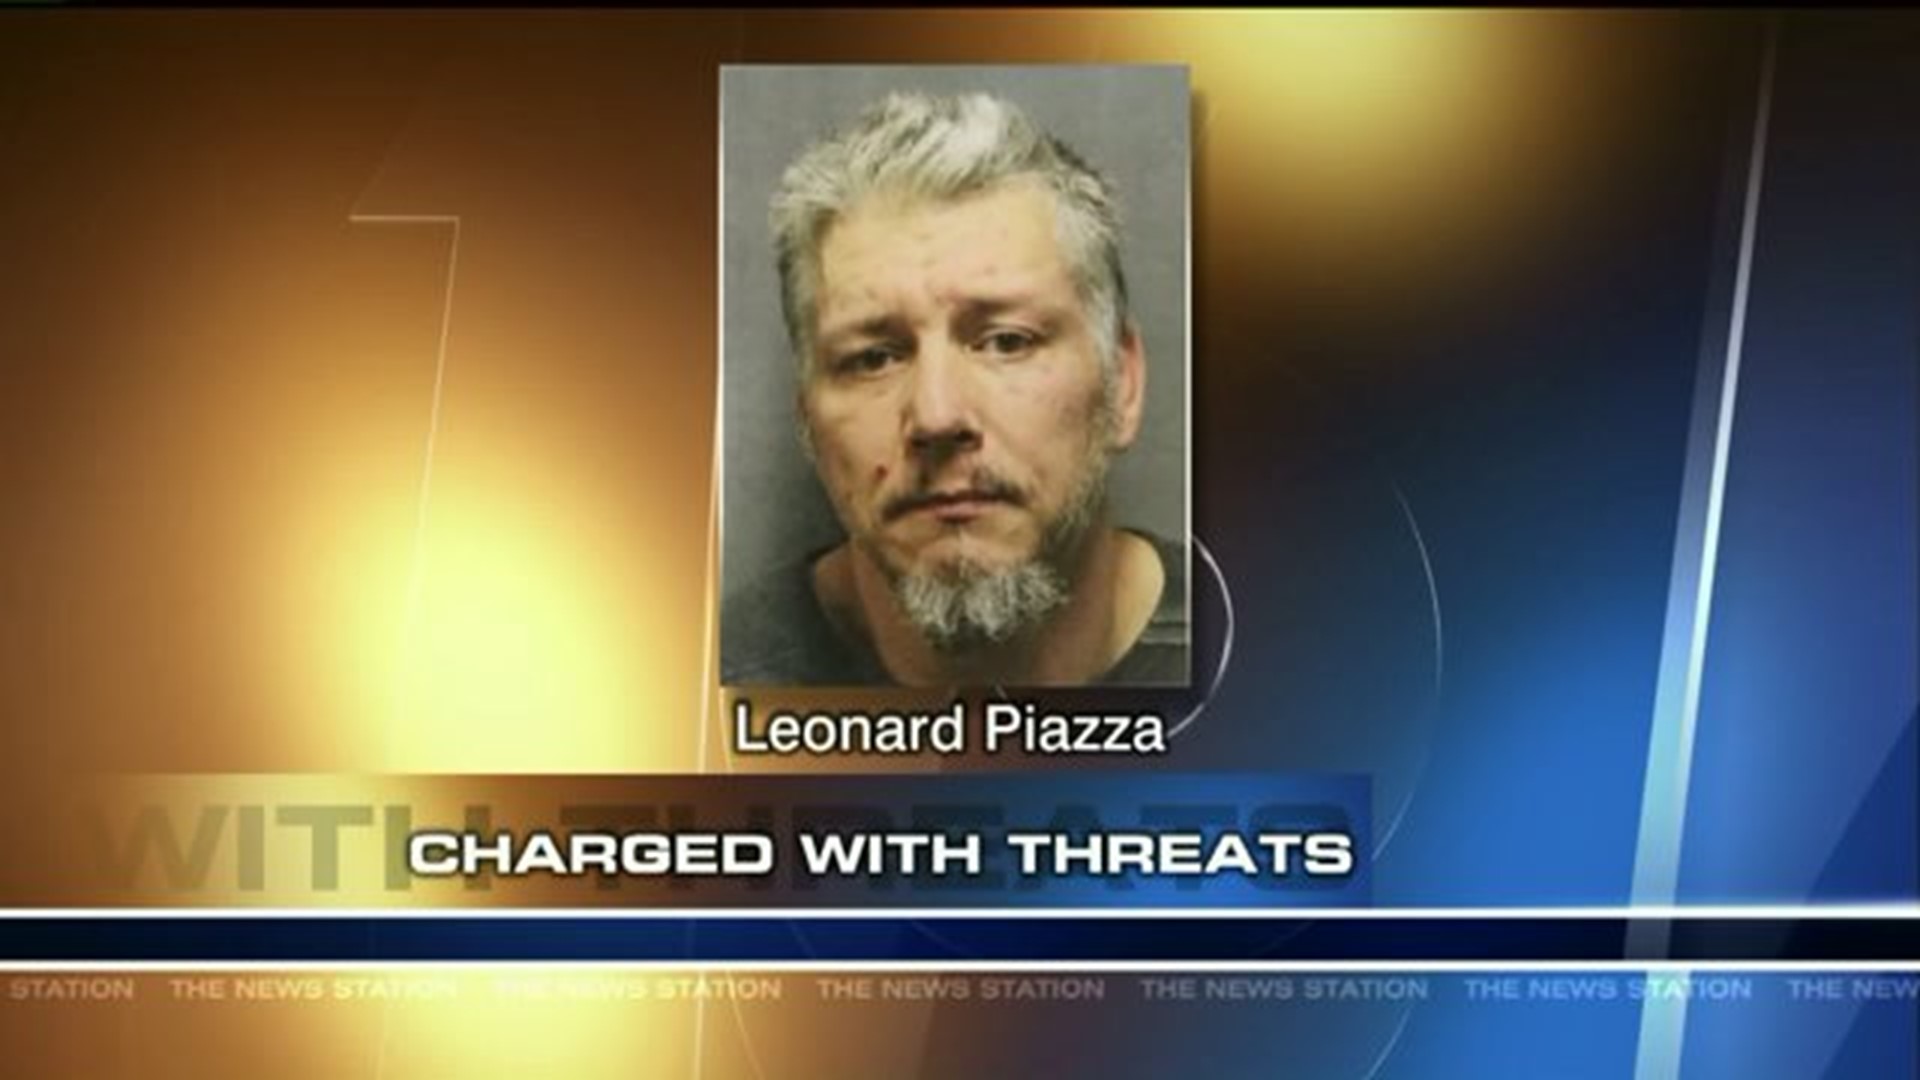 Former Luzerne County Elections Director Accused of Threatening State Representative